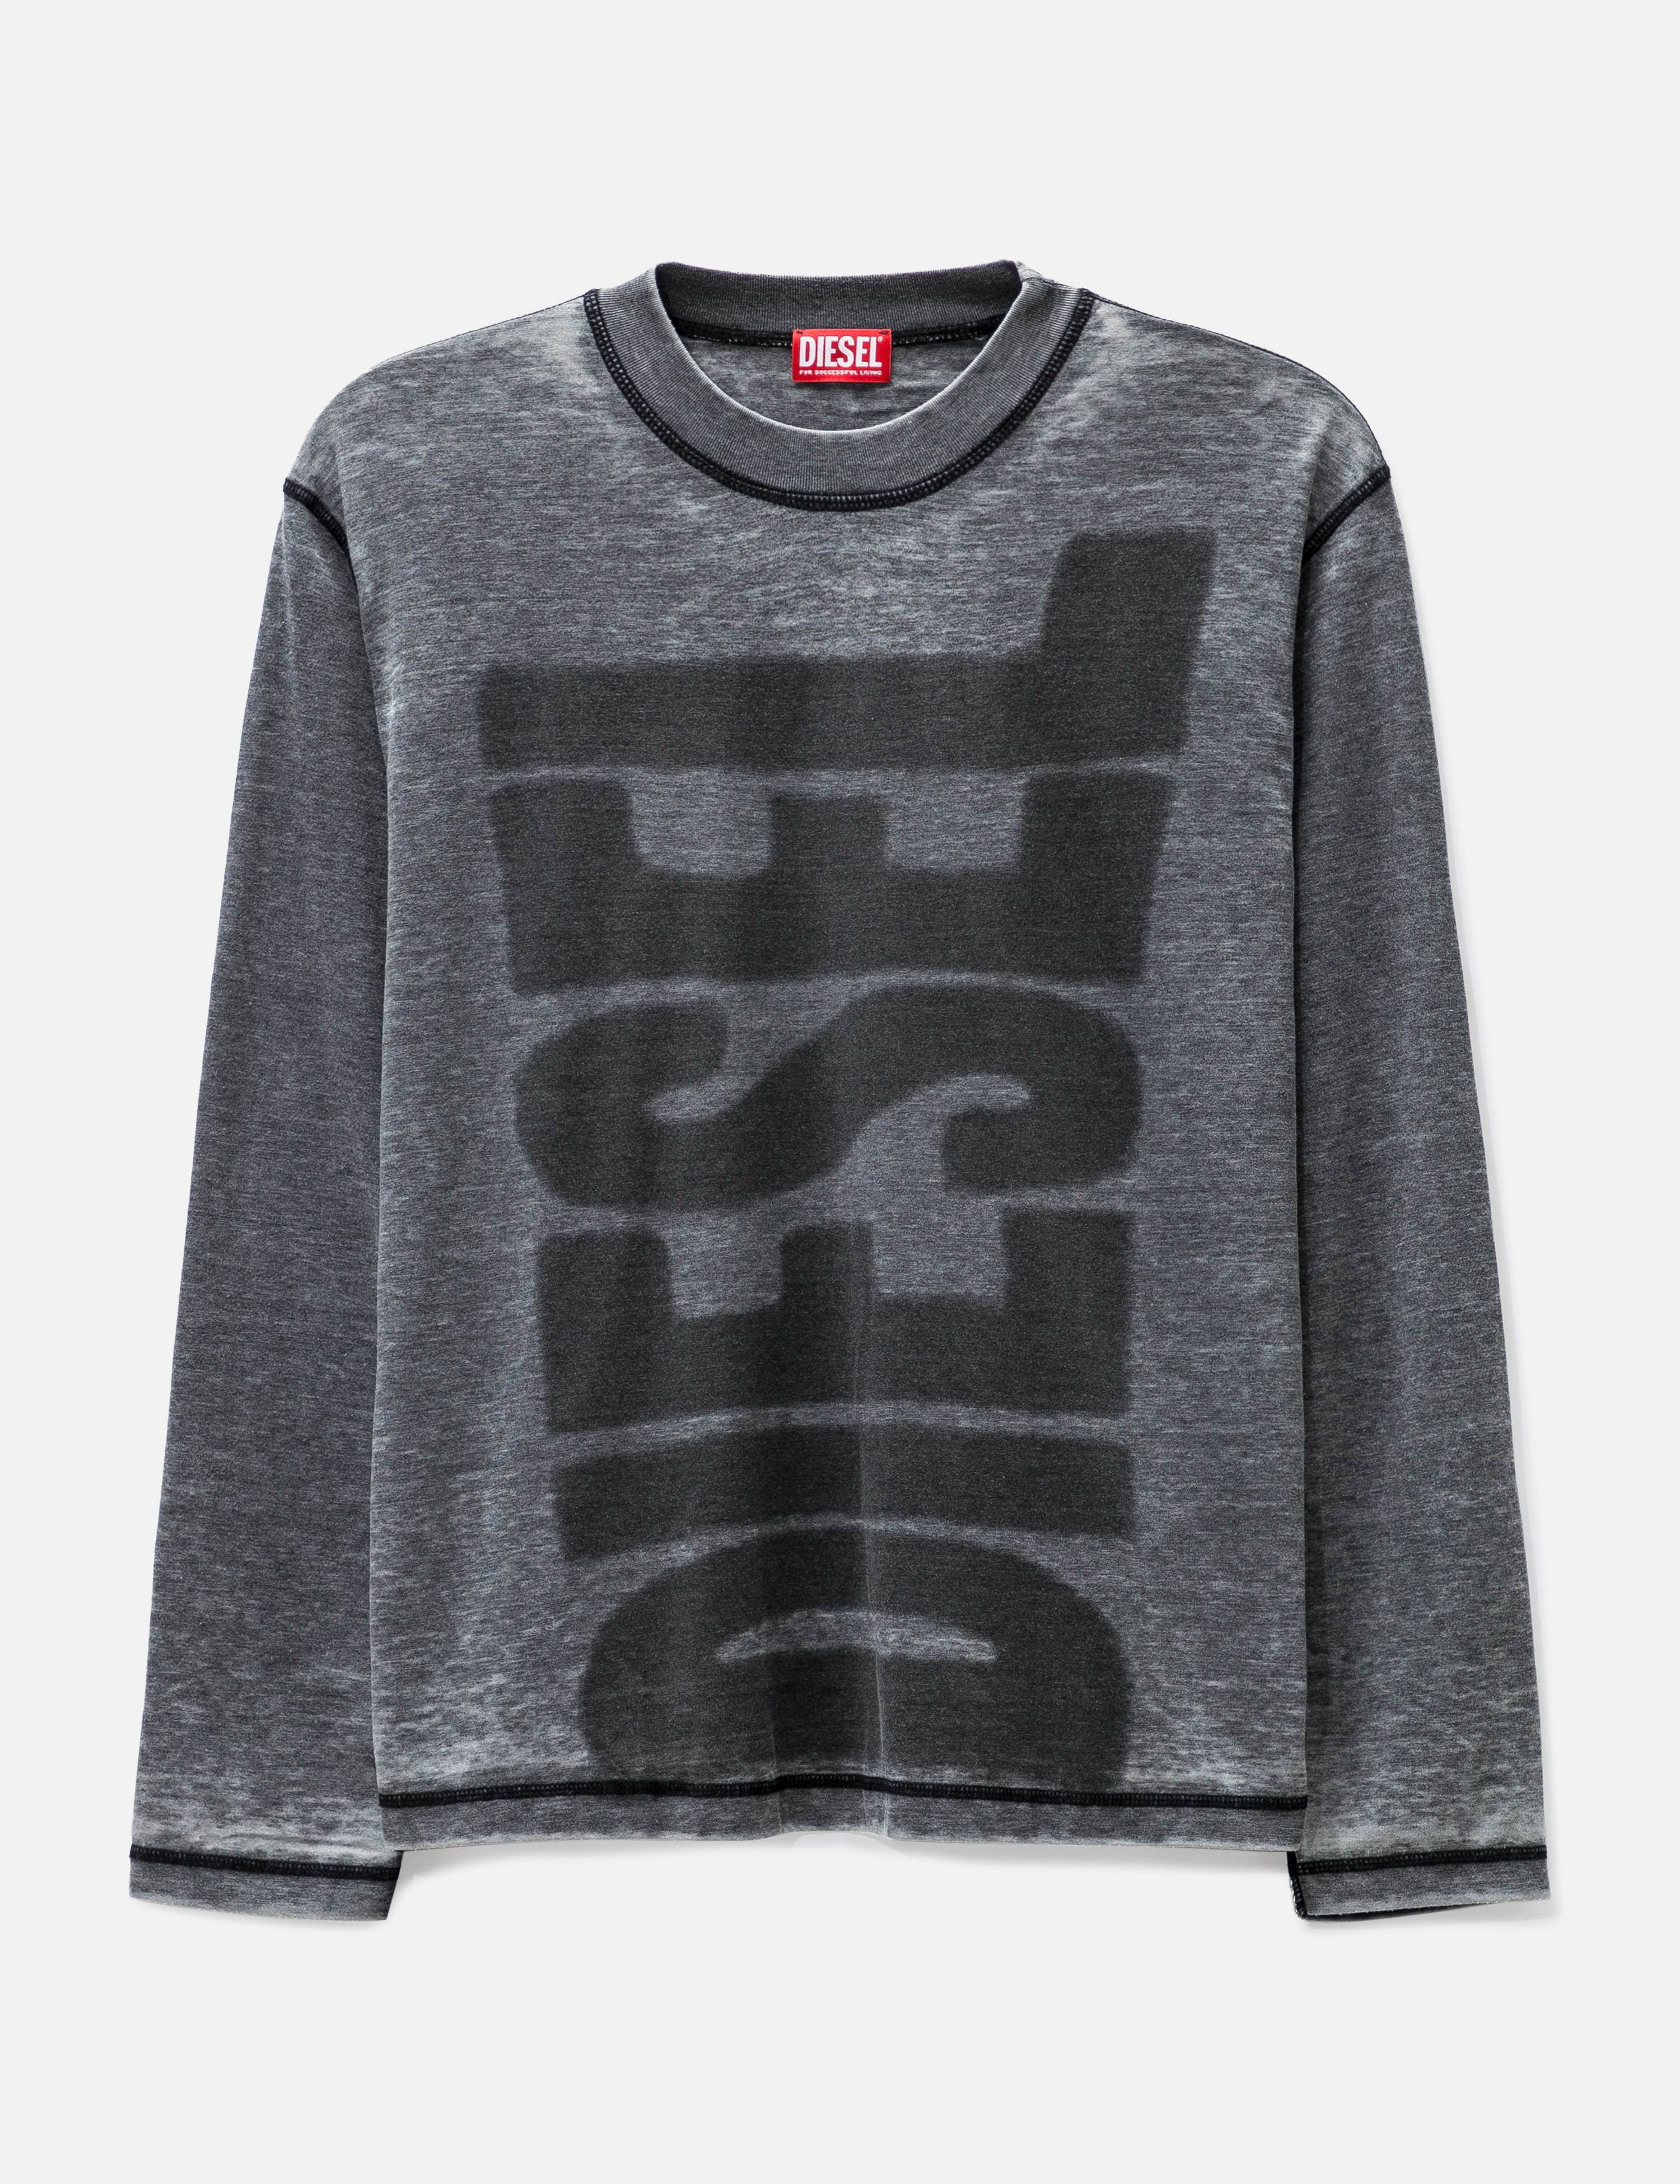 LS T-Shirts | HBX - Globally Curated Fashion and Lifestyle by